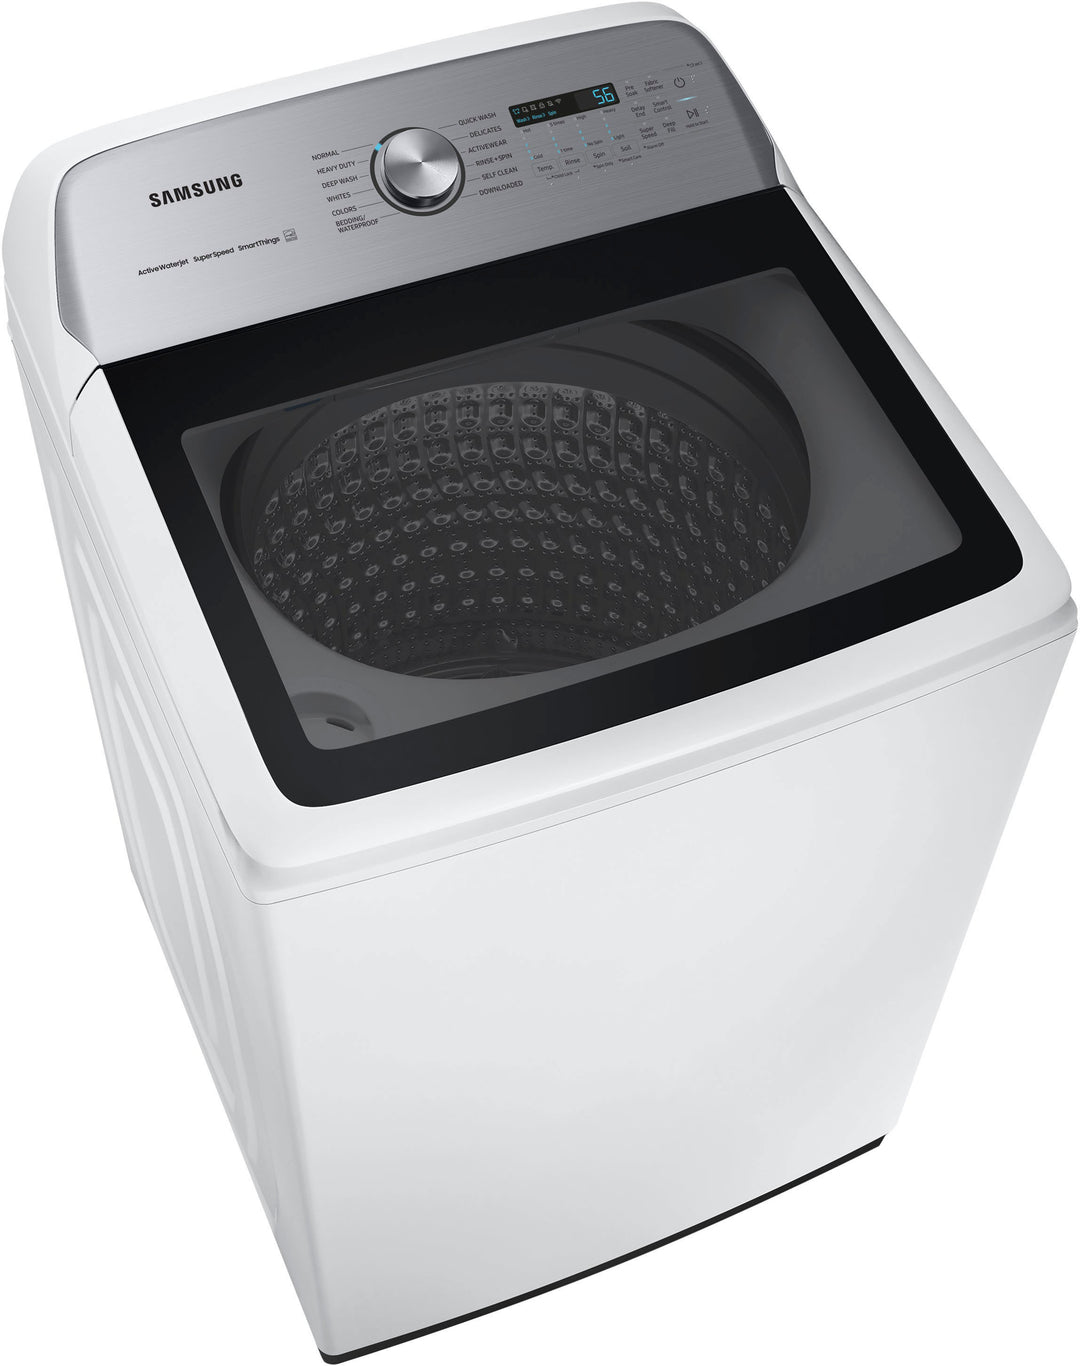 Samsung - 5.2 cu. ft. Large Capacity Smart Top Load Washer with Super Speed Wash - White_5